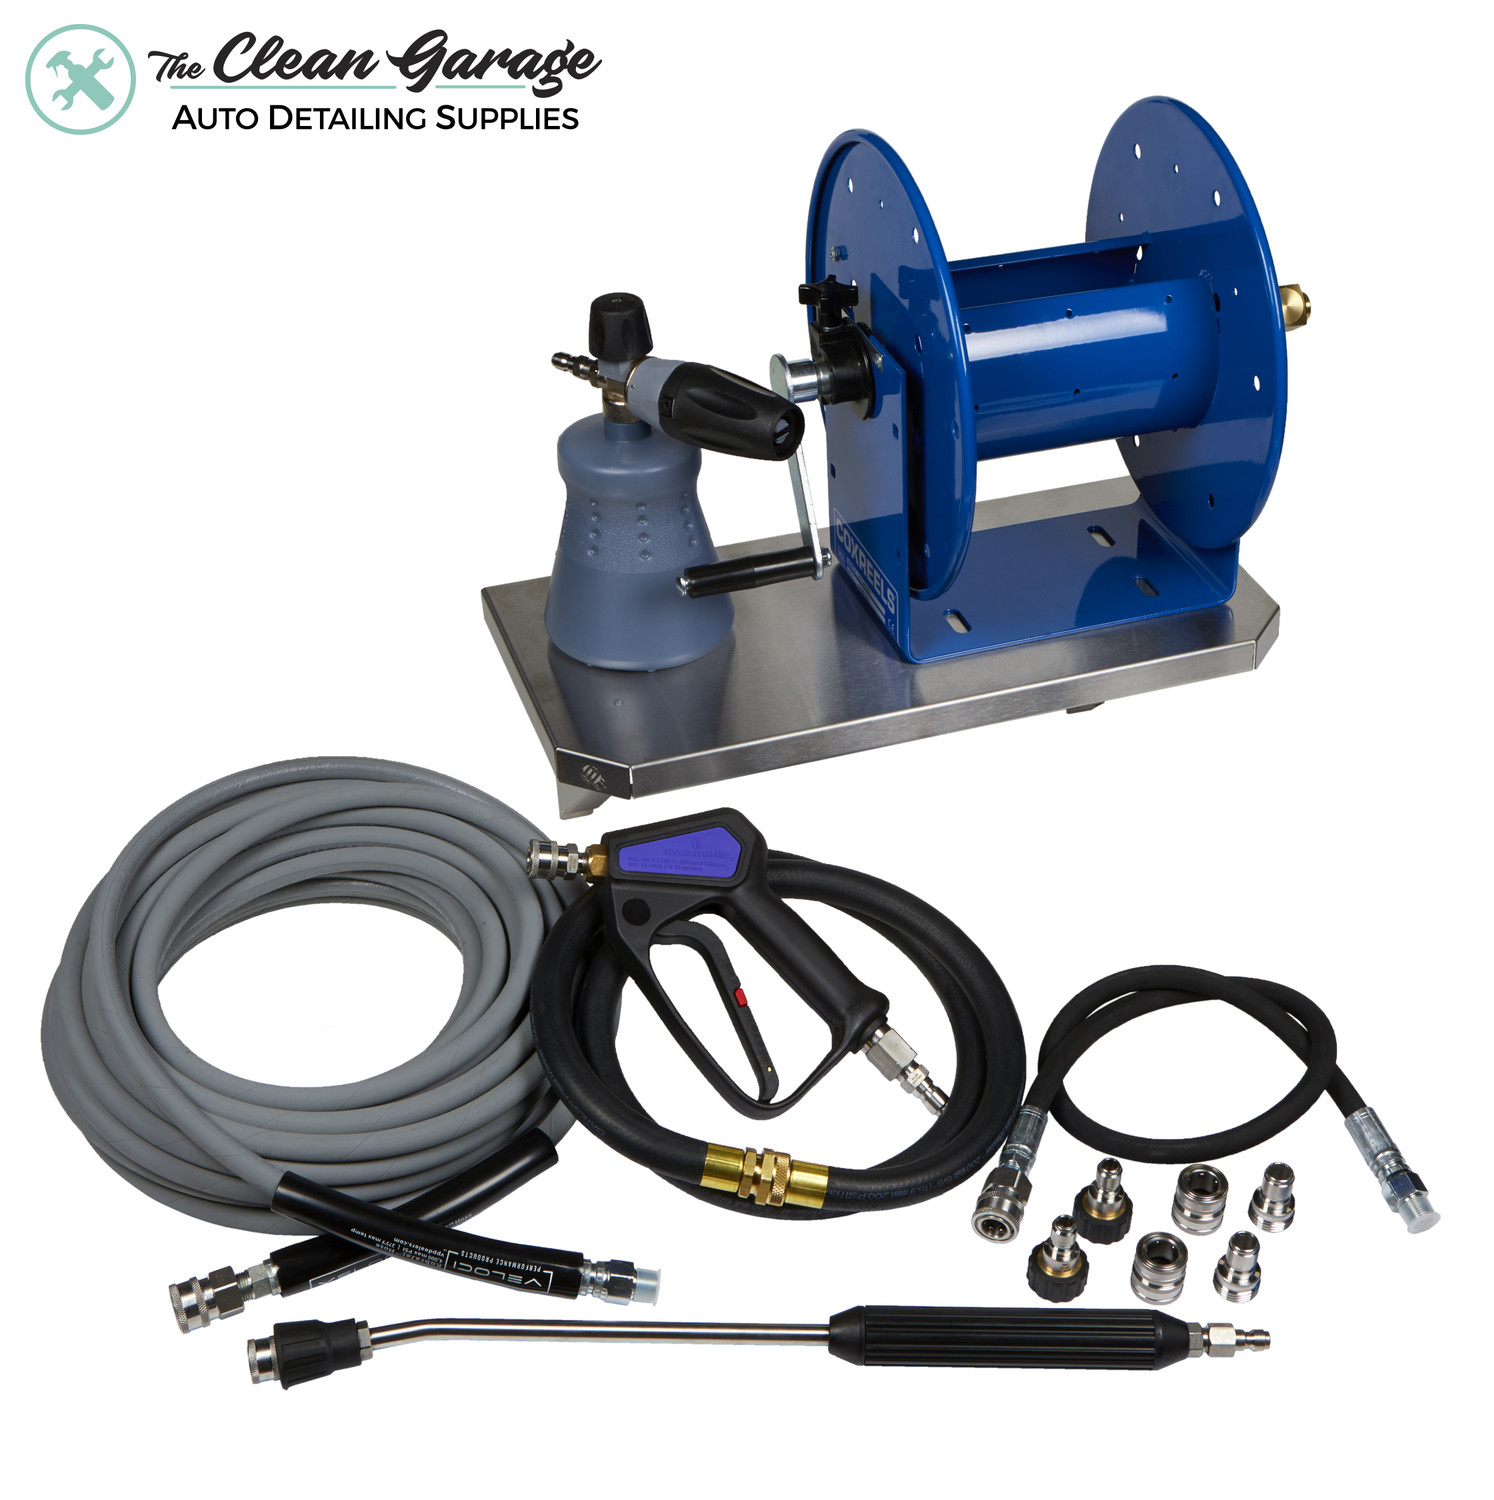 The Clean Garage Complete Wall Mount Pressure Washer Upgrade Package